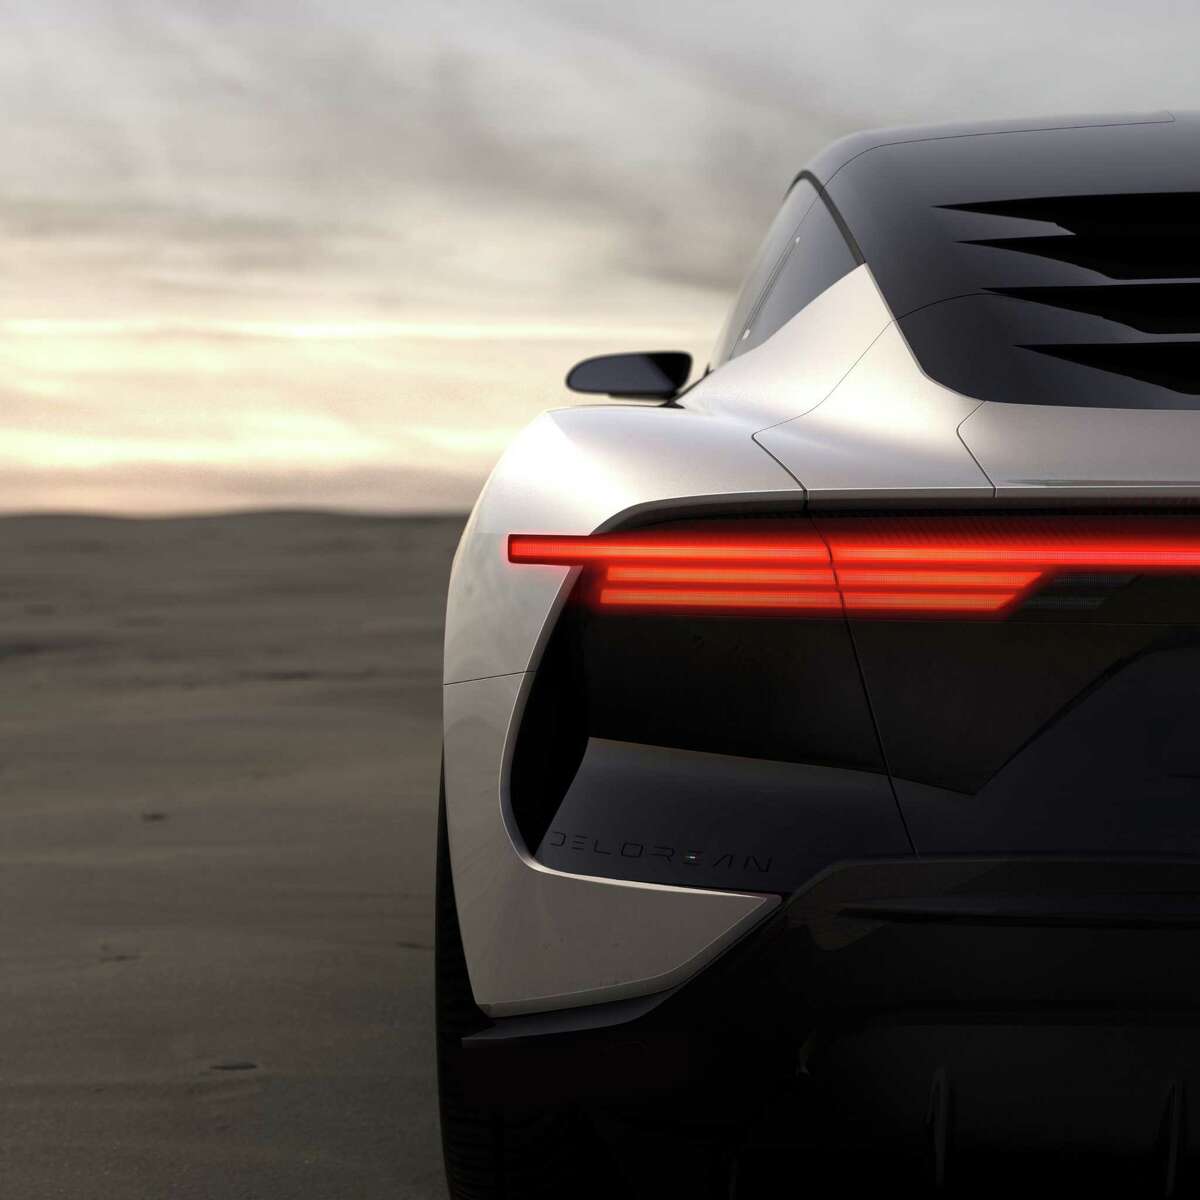 DeLorean released a teaser image of its new electric sports car.